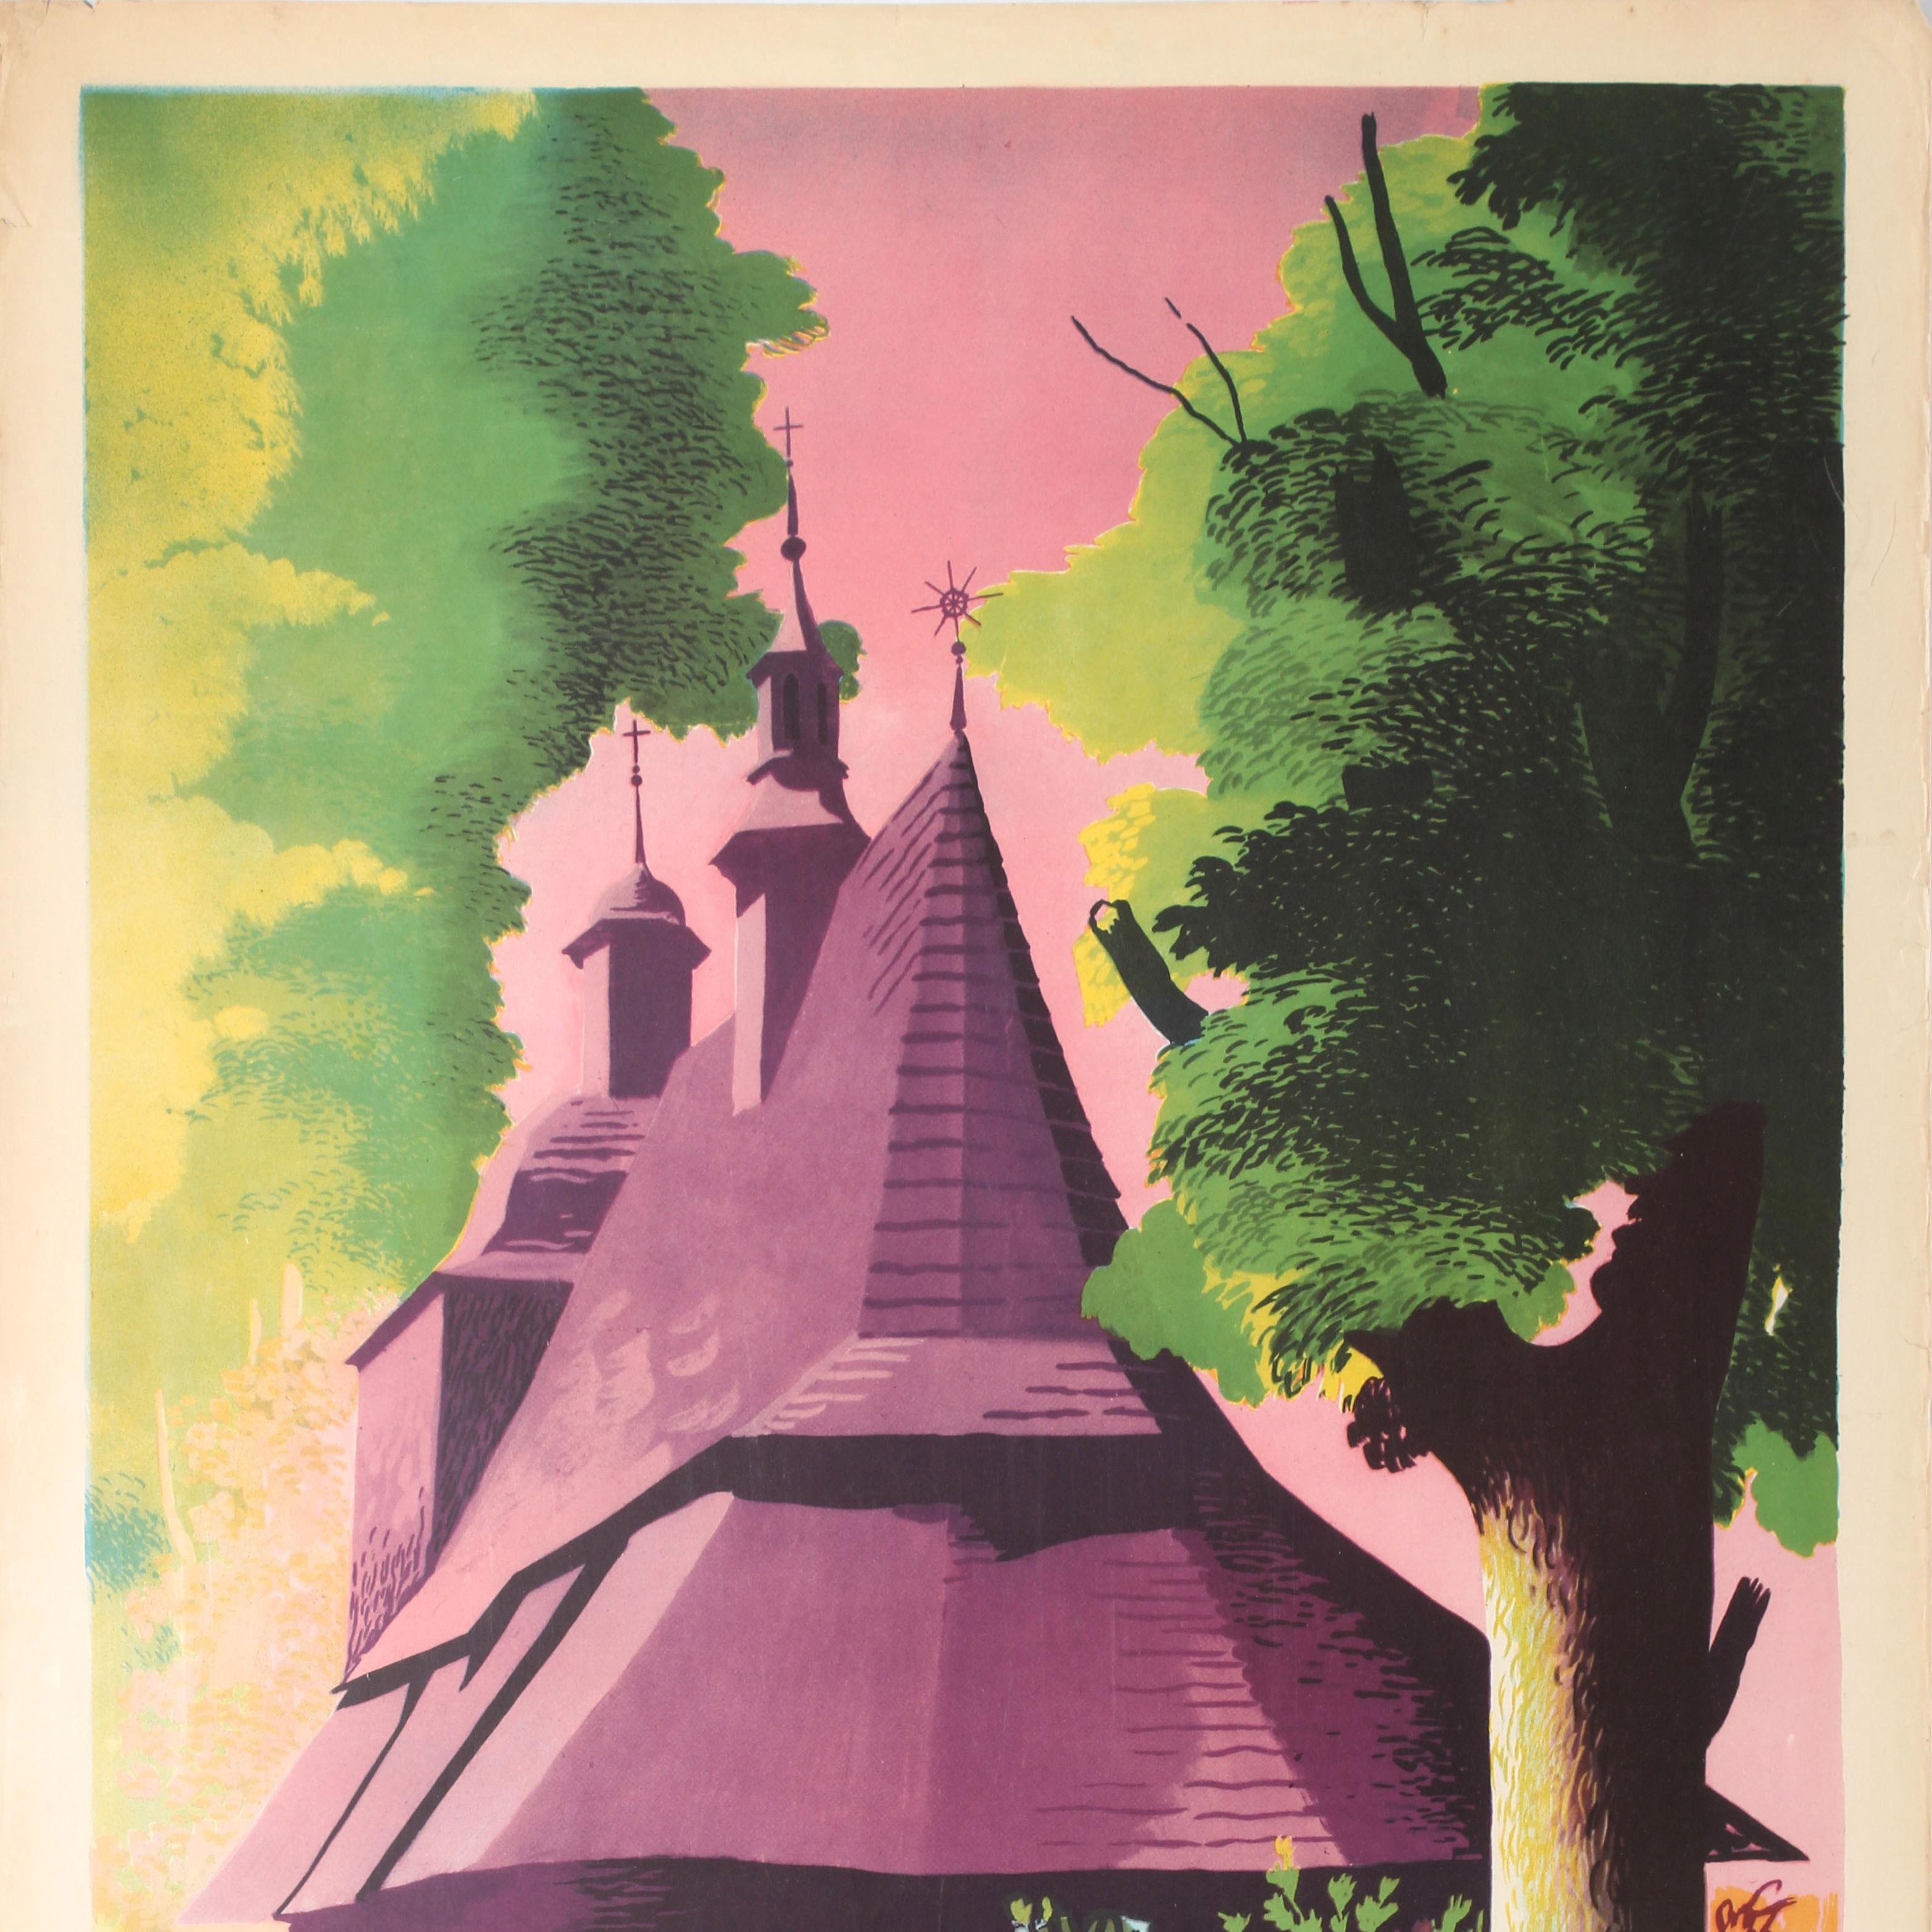 Original vintage travel poster - Visit Poland / Visitez la Pologne l'Eglise en Boise a Sekowa 1540 - featuring an illustration in pink and purple of the historic Gothic wooden church of St Philip and St James with its unique architecture of a steep